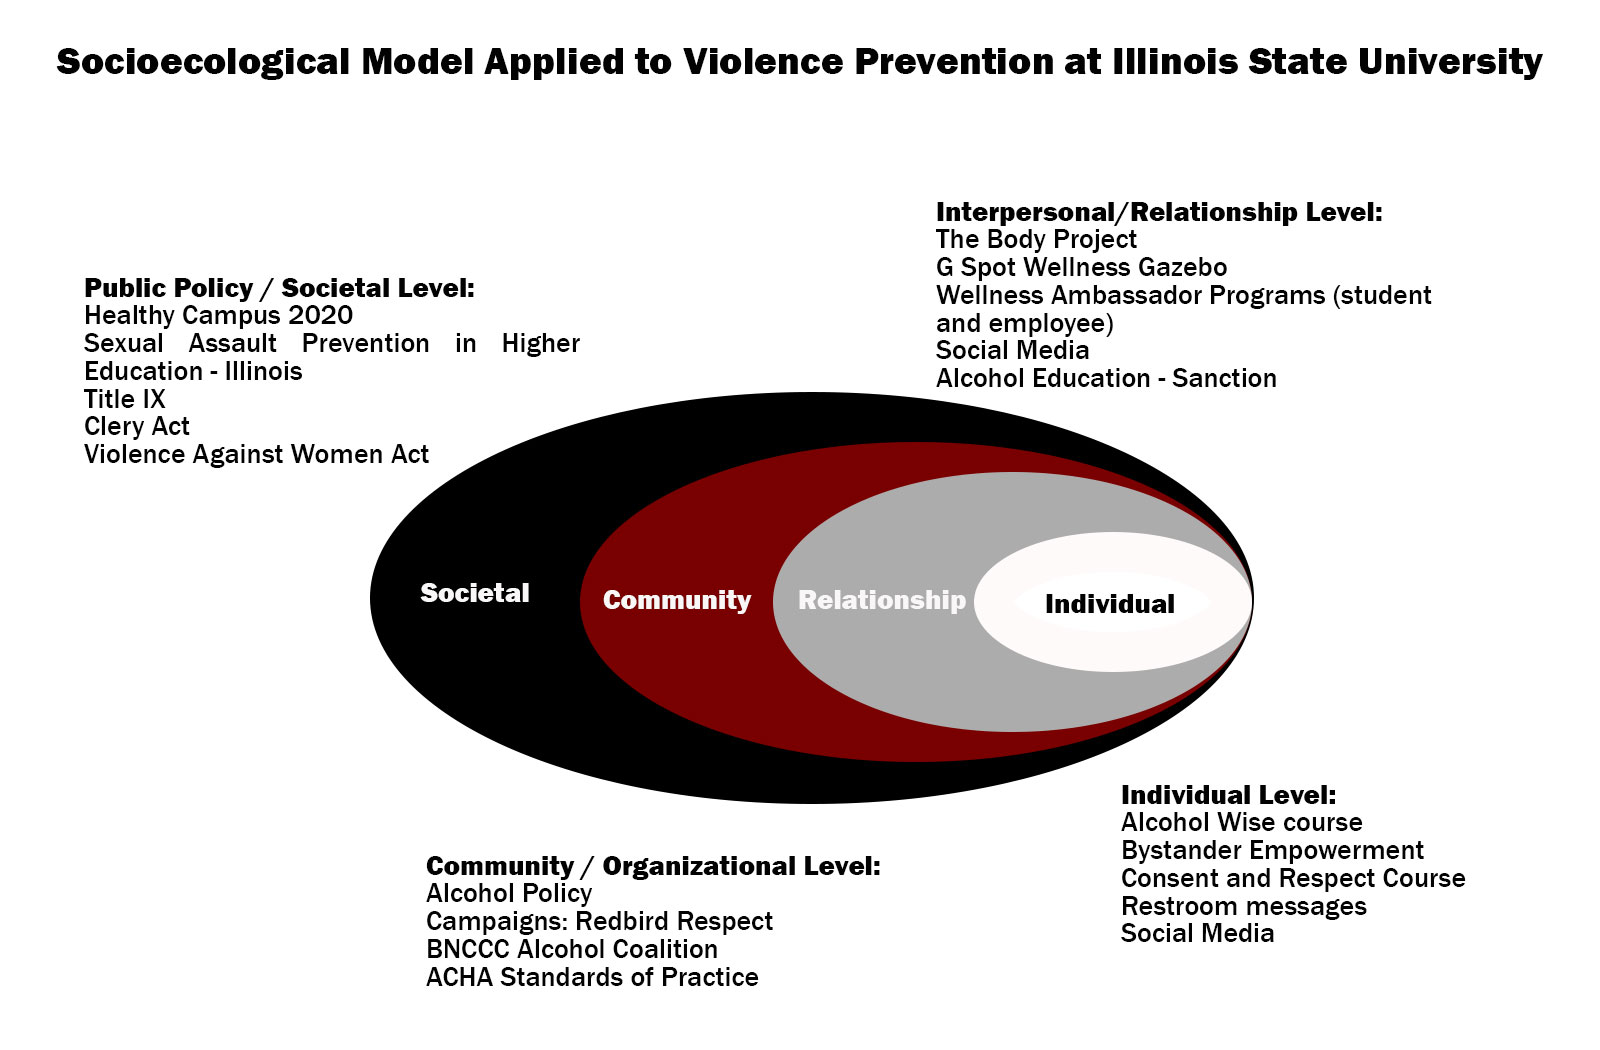 Diagram Illustrating Socioecological Model Applied to Violence Prevention at Illinois State University